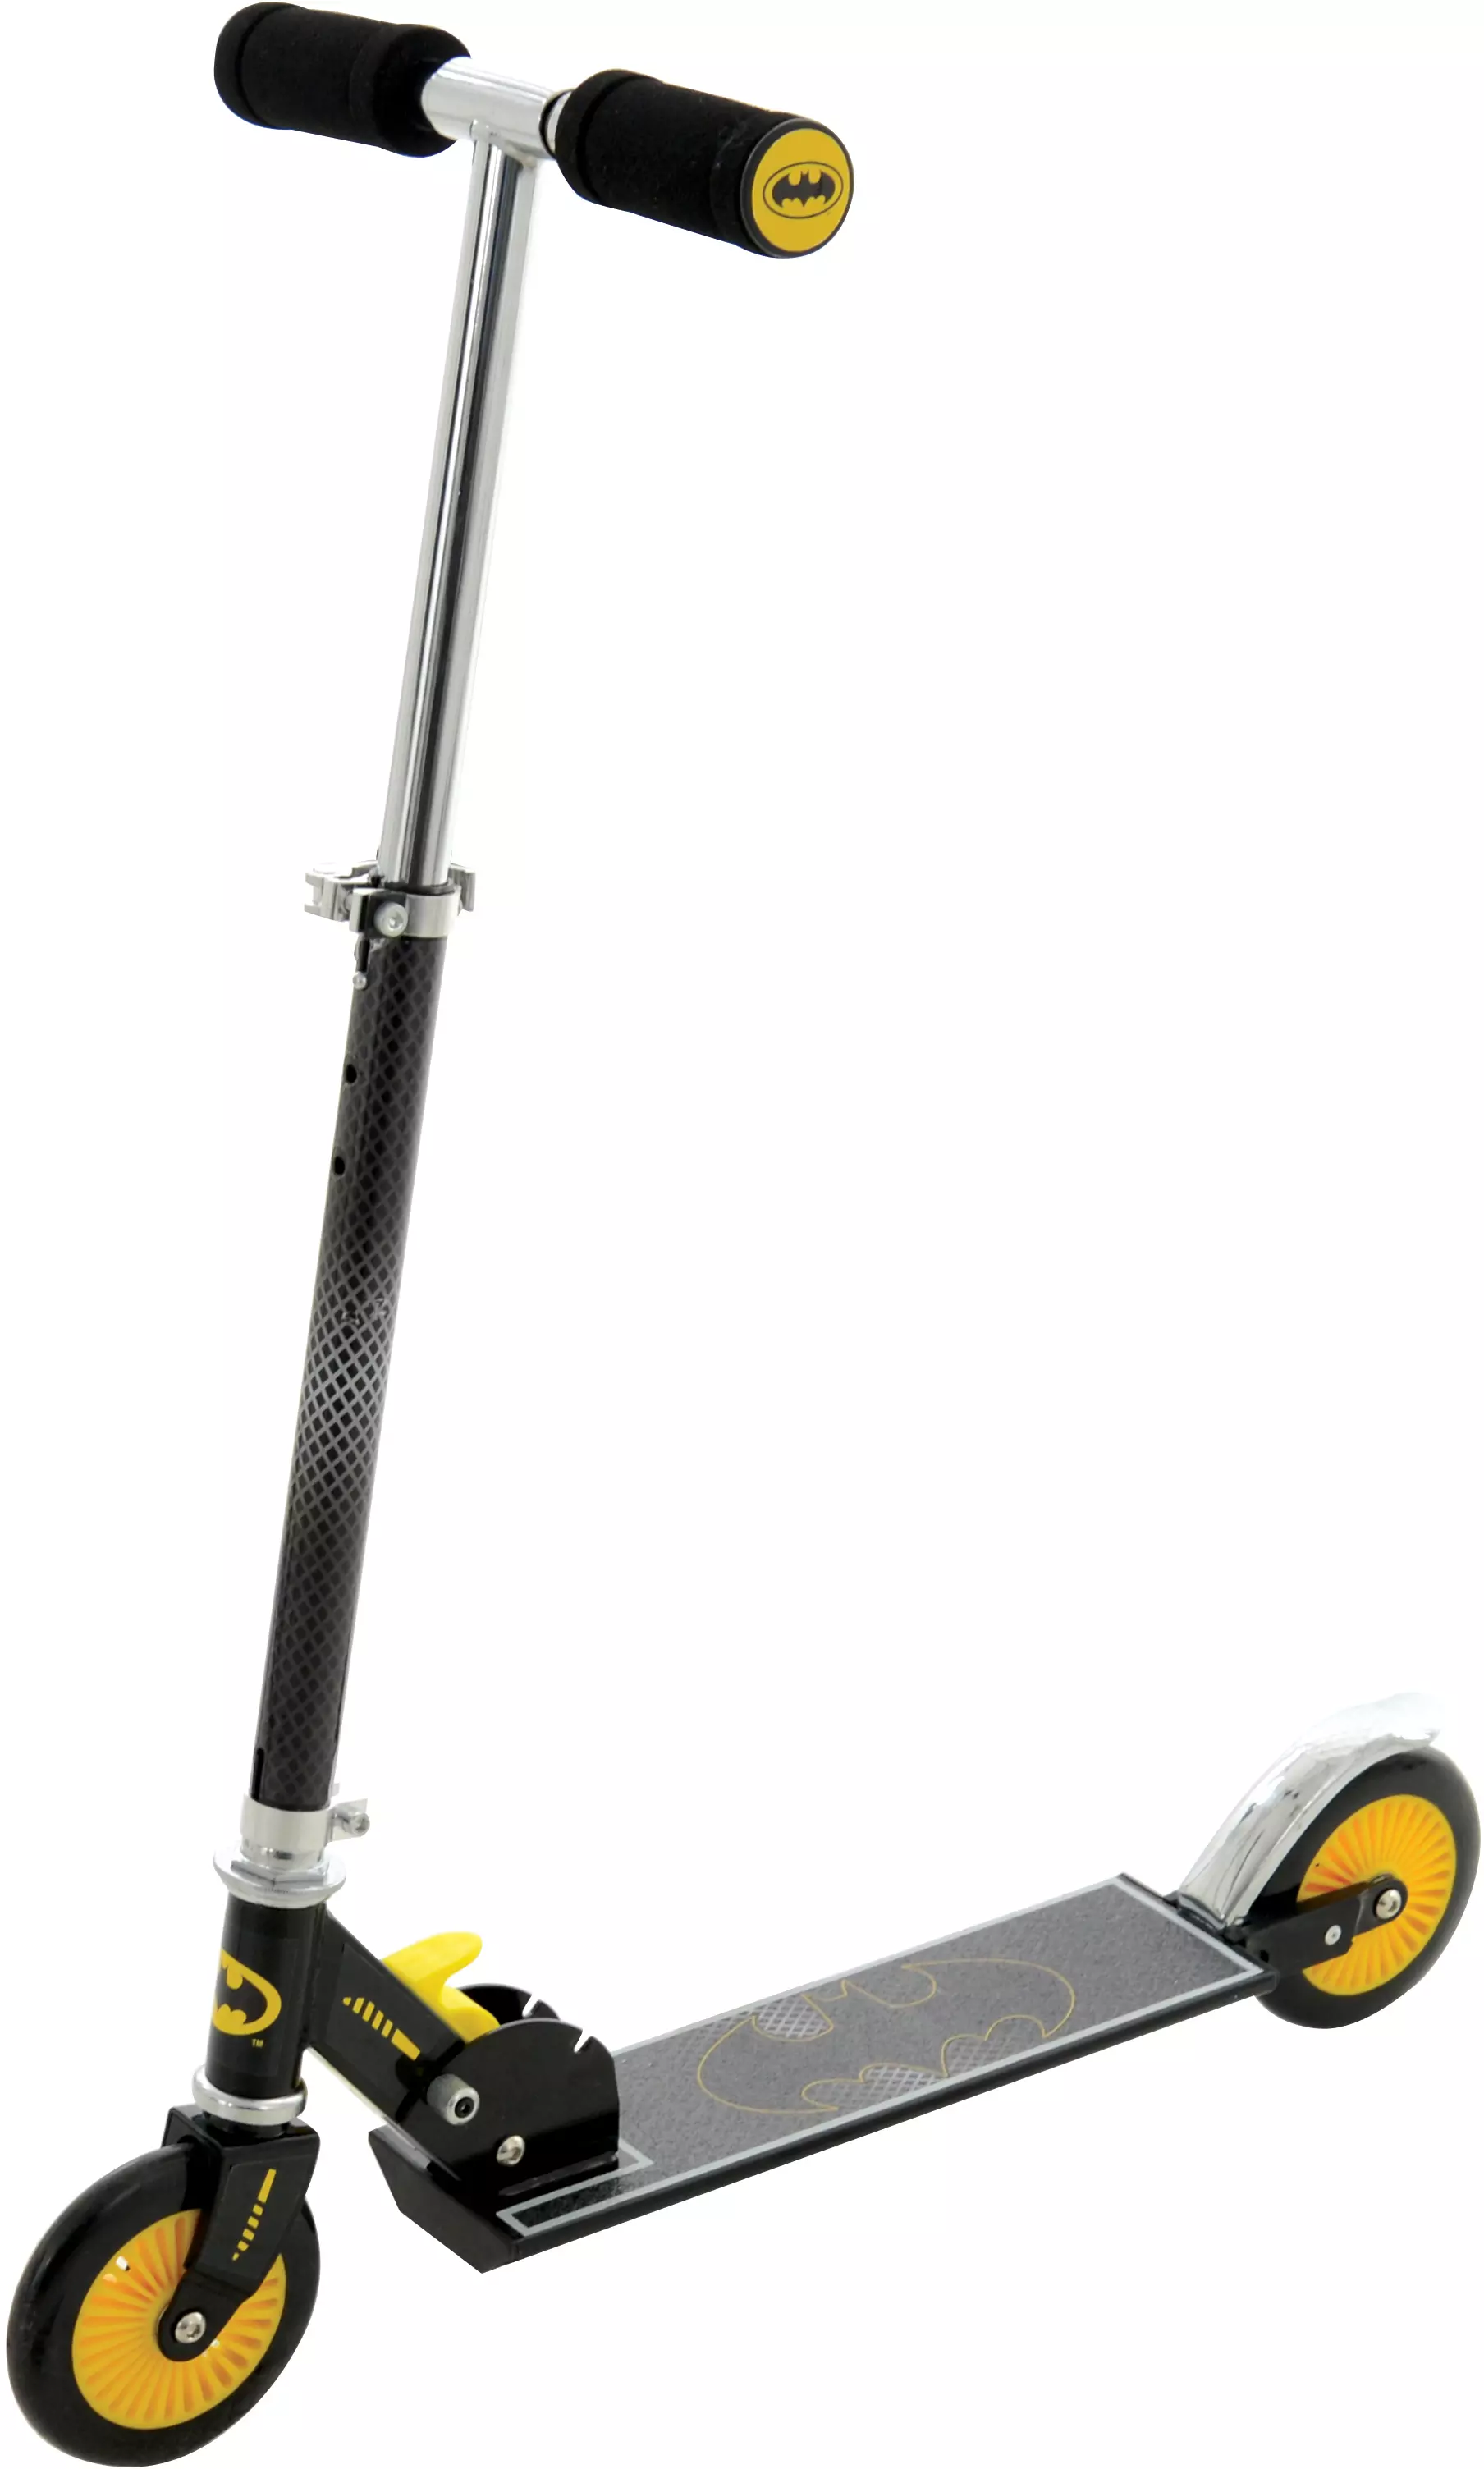 2 wheel scooter halfords